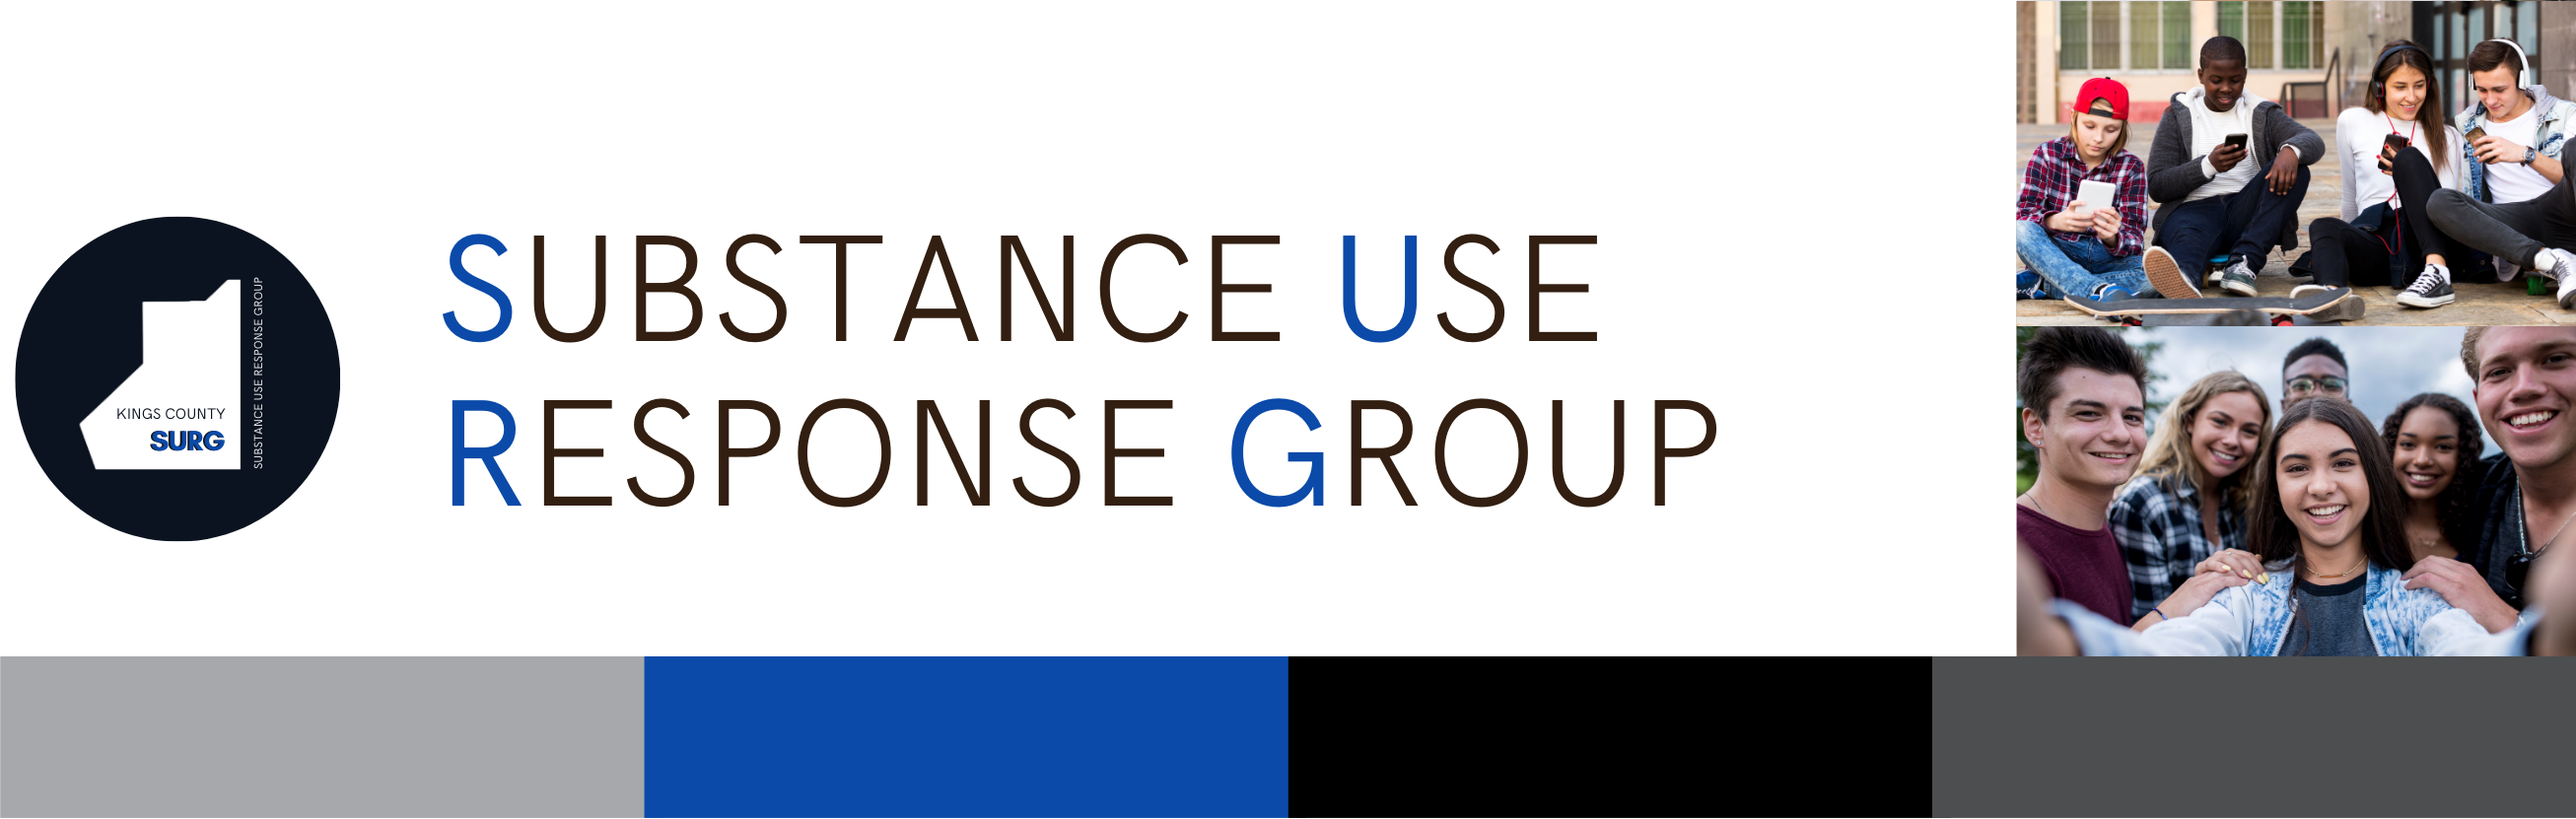 Substance Use Response Group